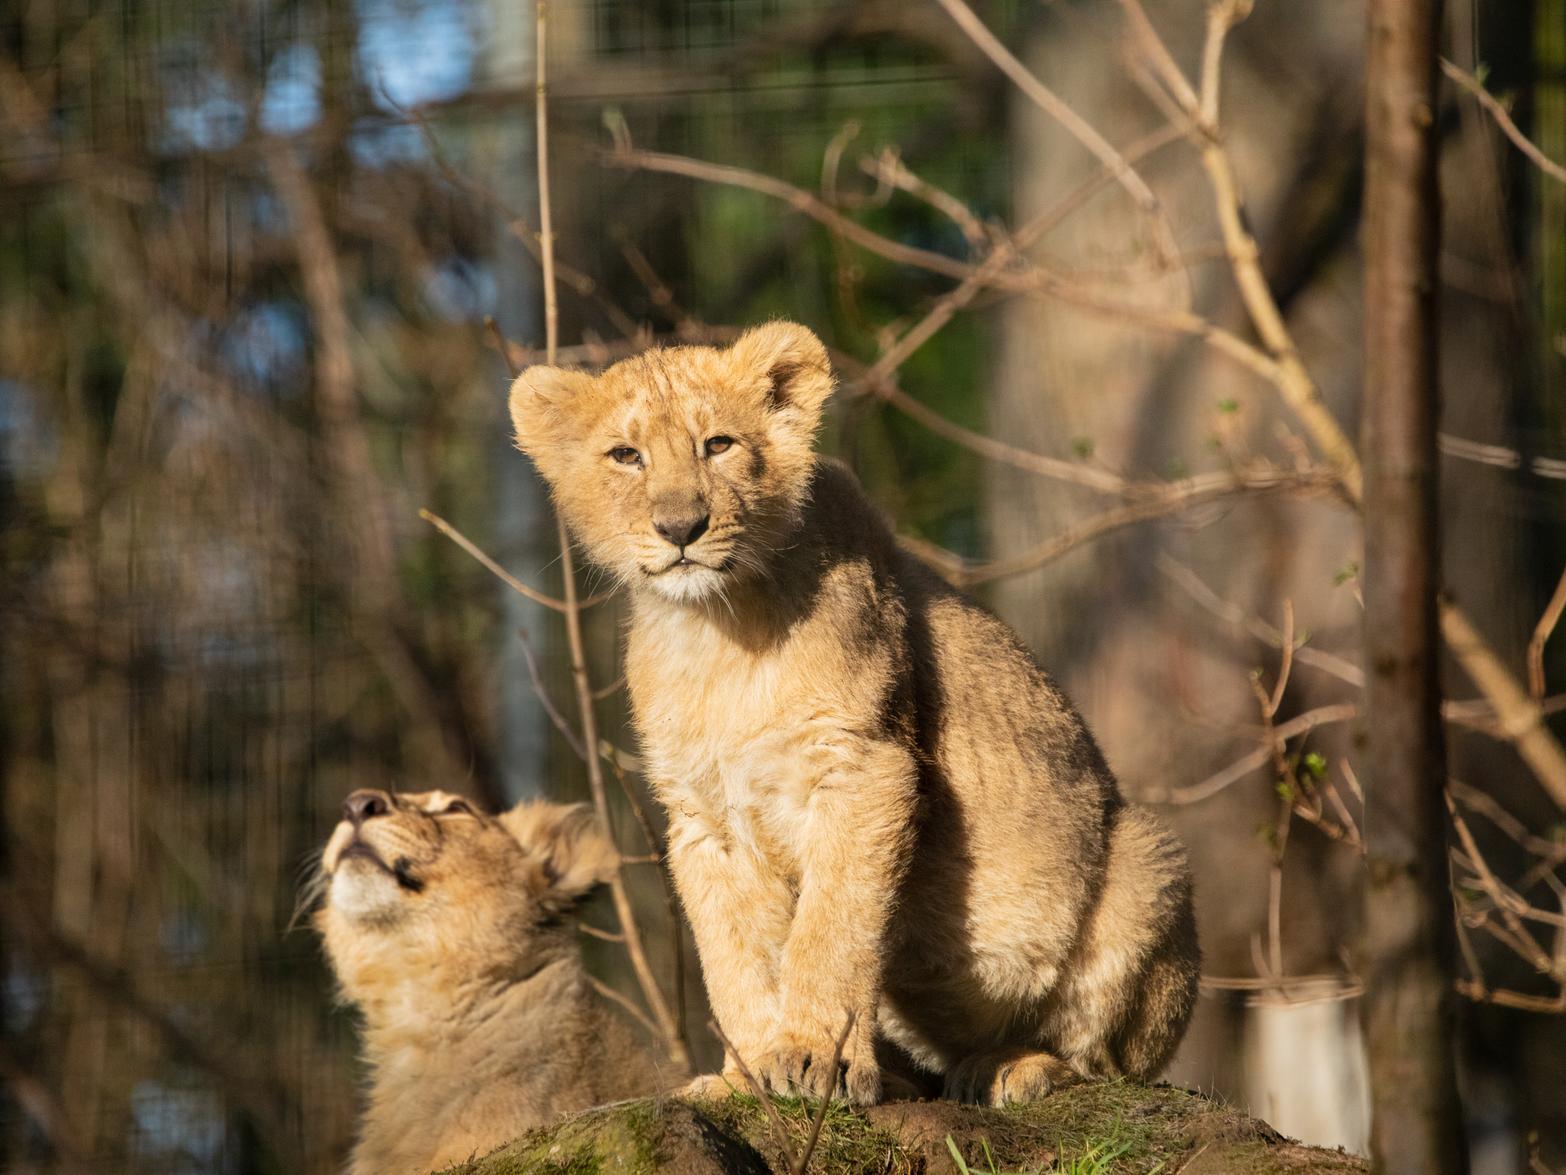 Roberta (mum) was selected to be paired with resident male Jayendra (dad) through the European Endangered Species Programme, which is run by a Species Coordinator and is supported by experts at other zoos across Europe.